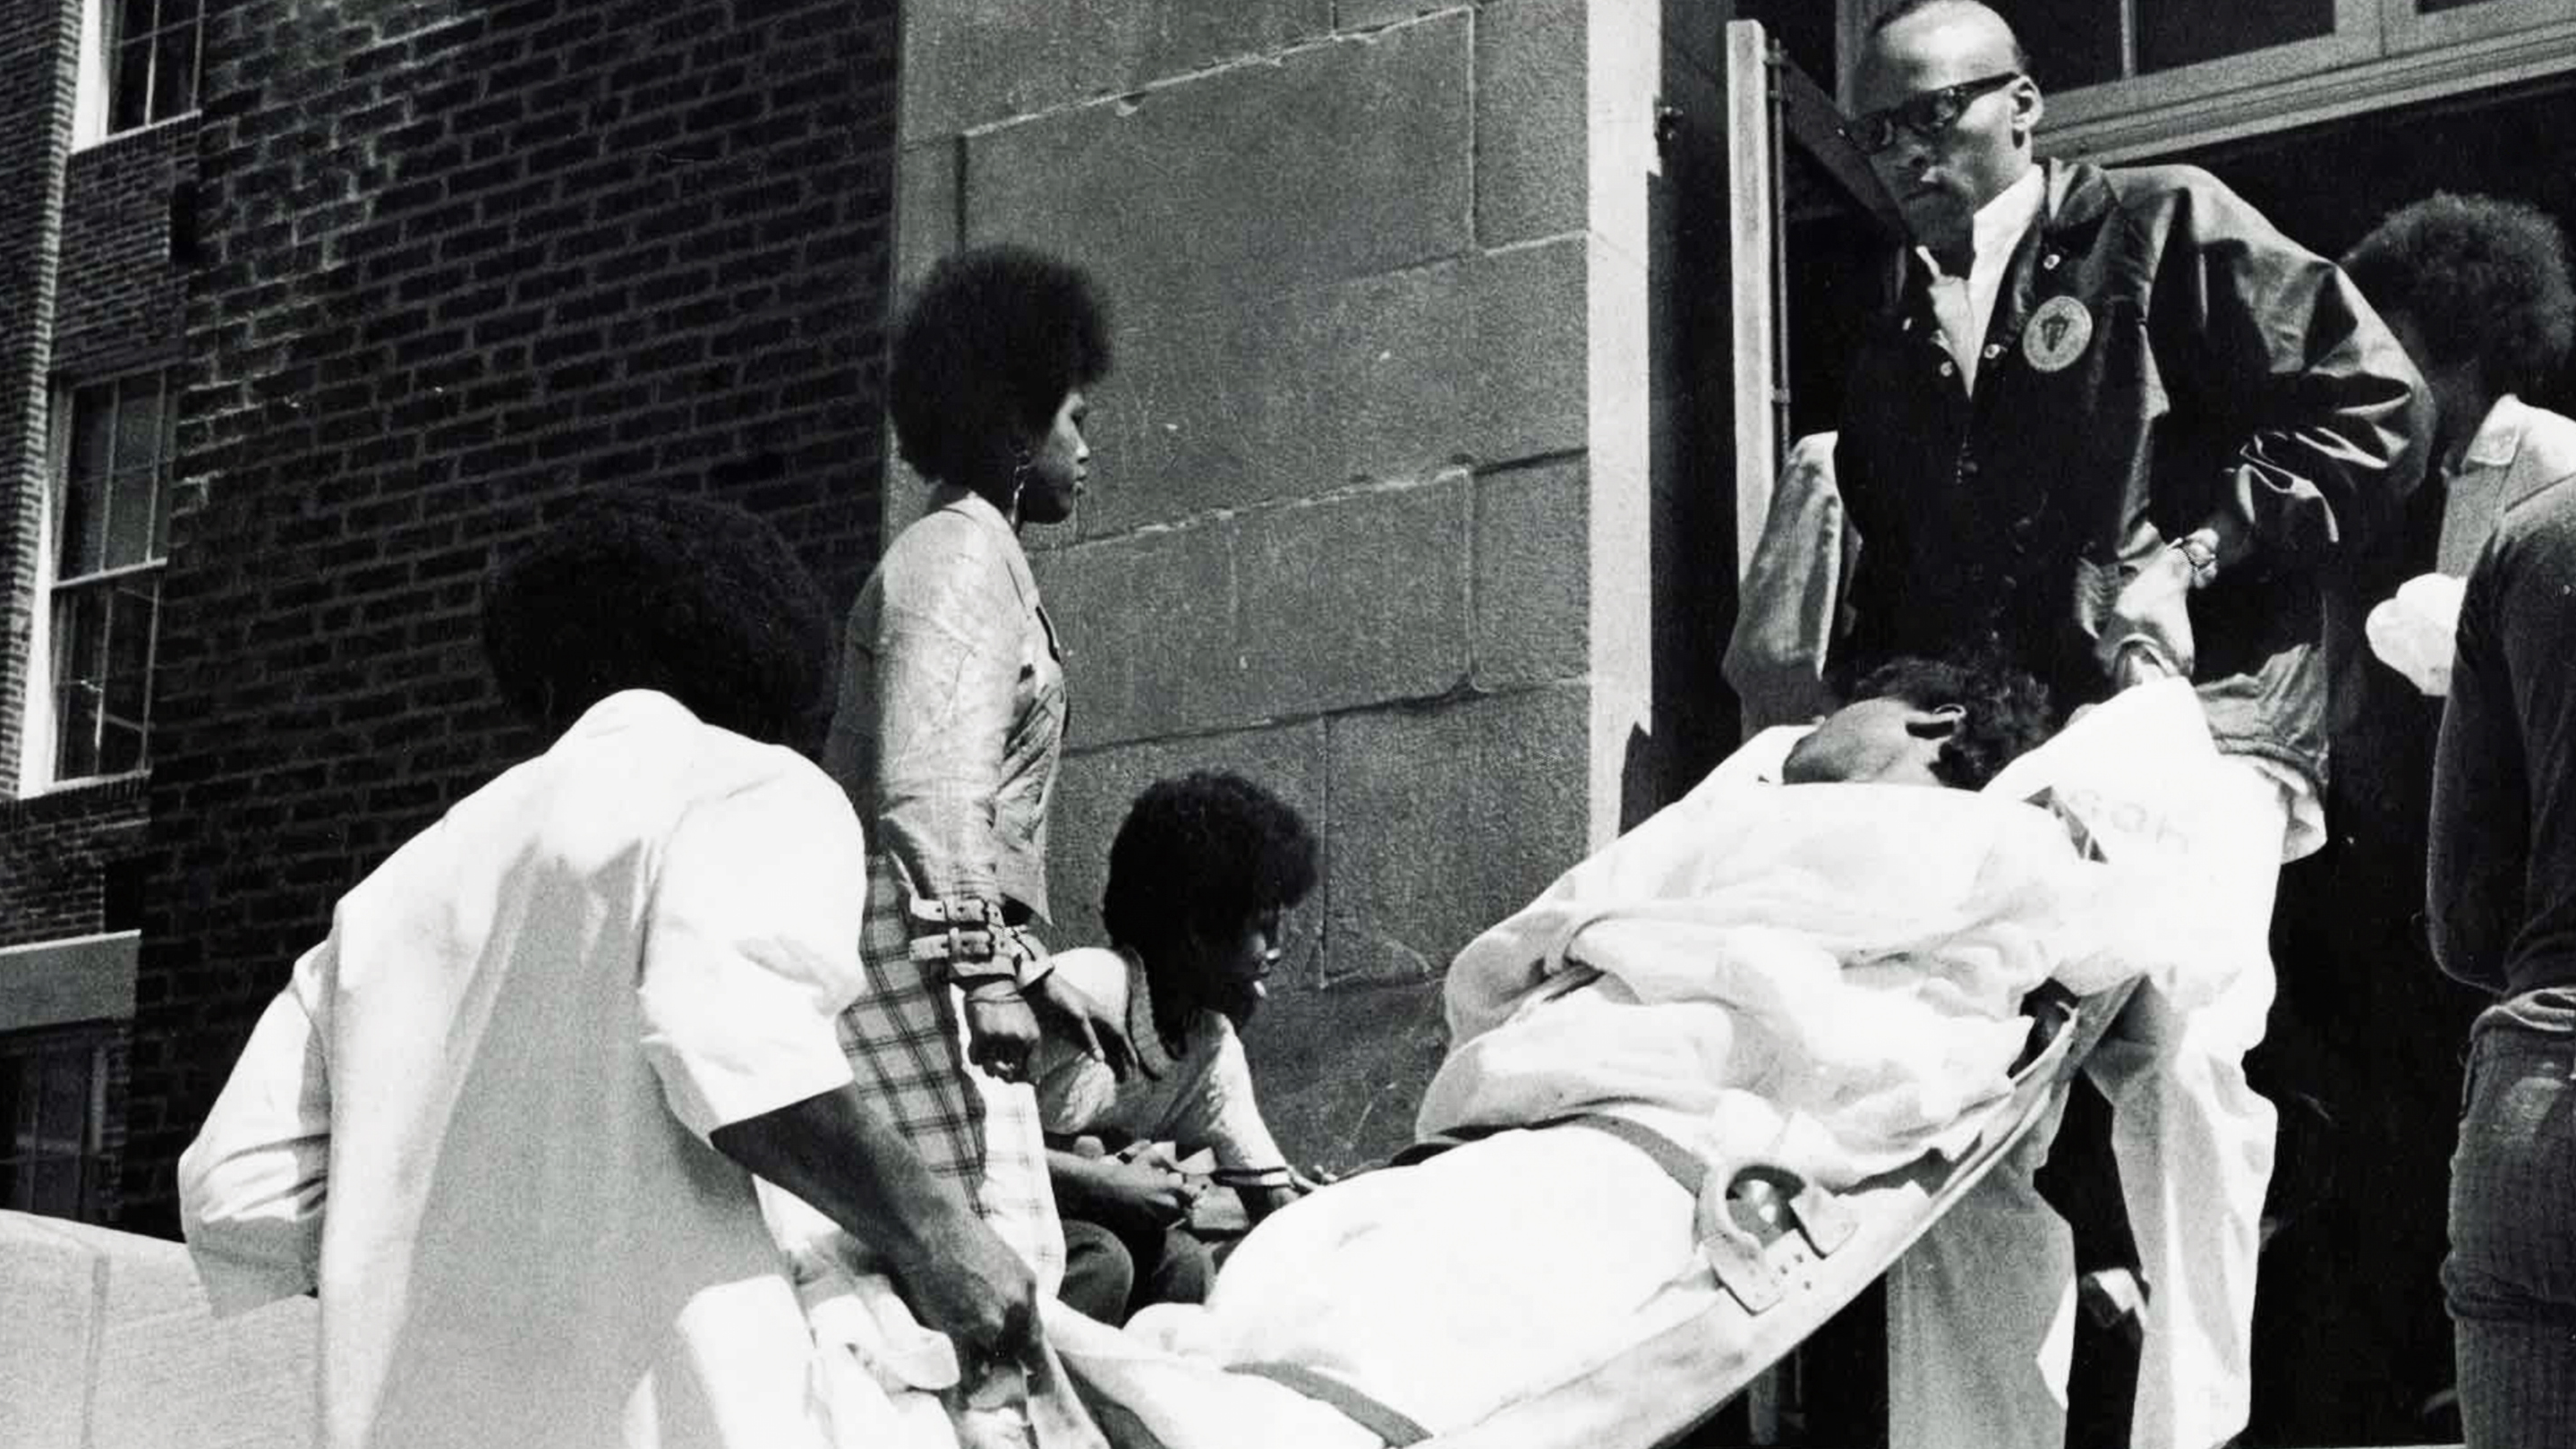 Freedom House Ambulance EMTs James Kyte & Mitchell Brown carrying unconscious female student from Pittsburgh Schenley High School. 1971-1972 (source: John Moon)